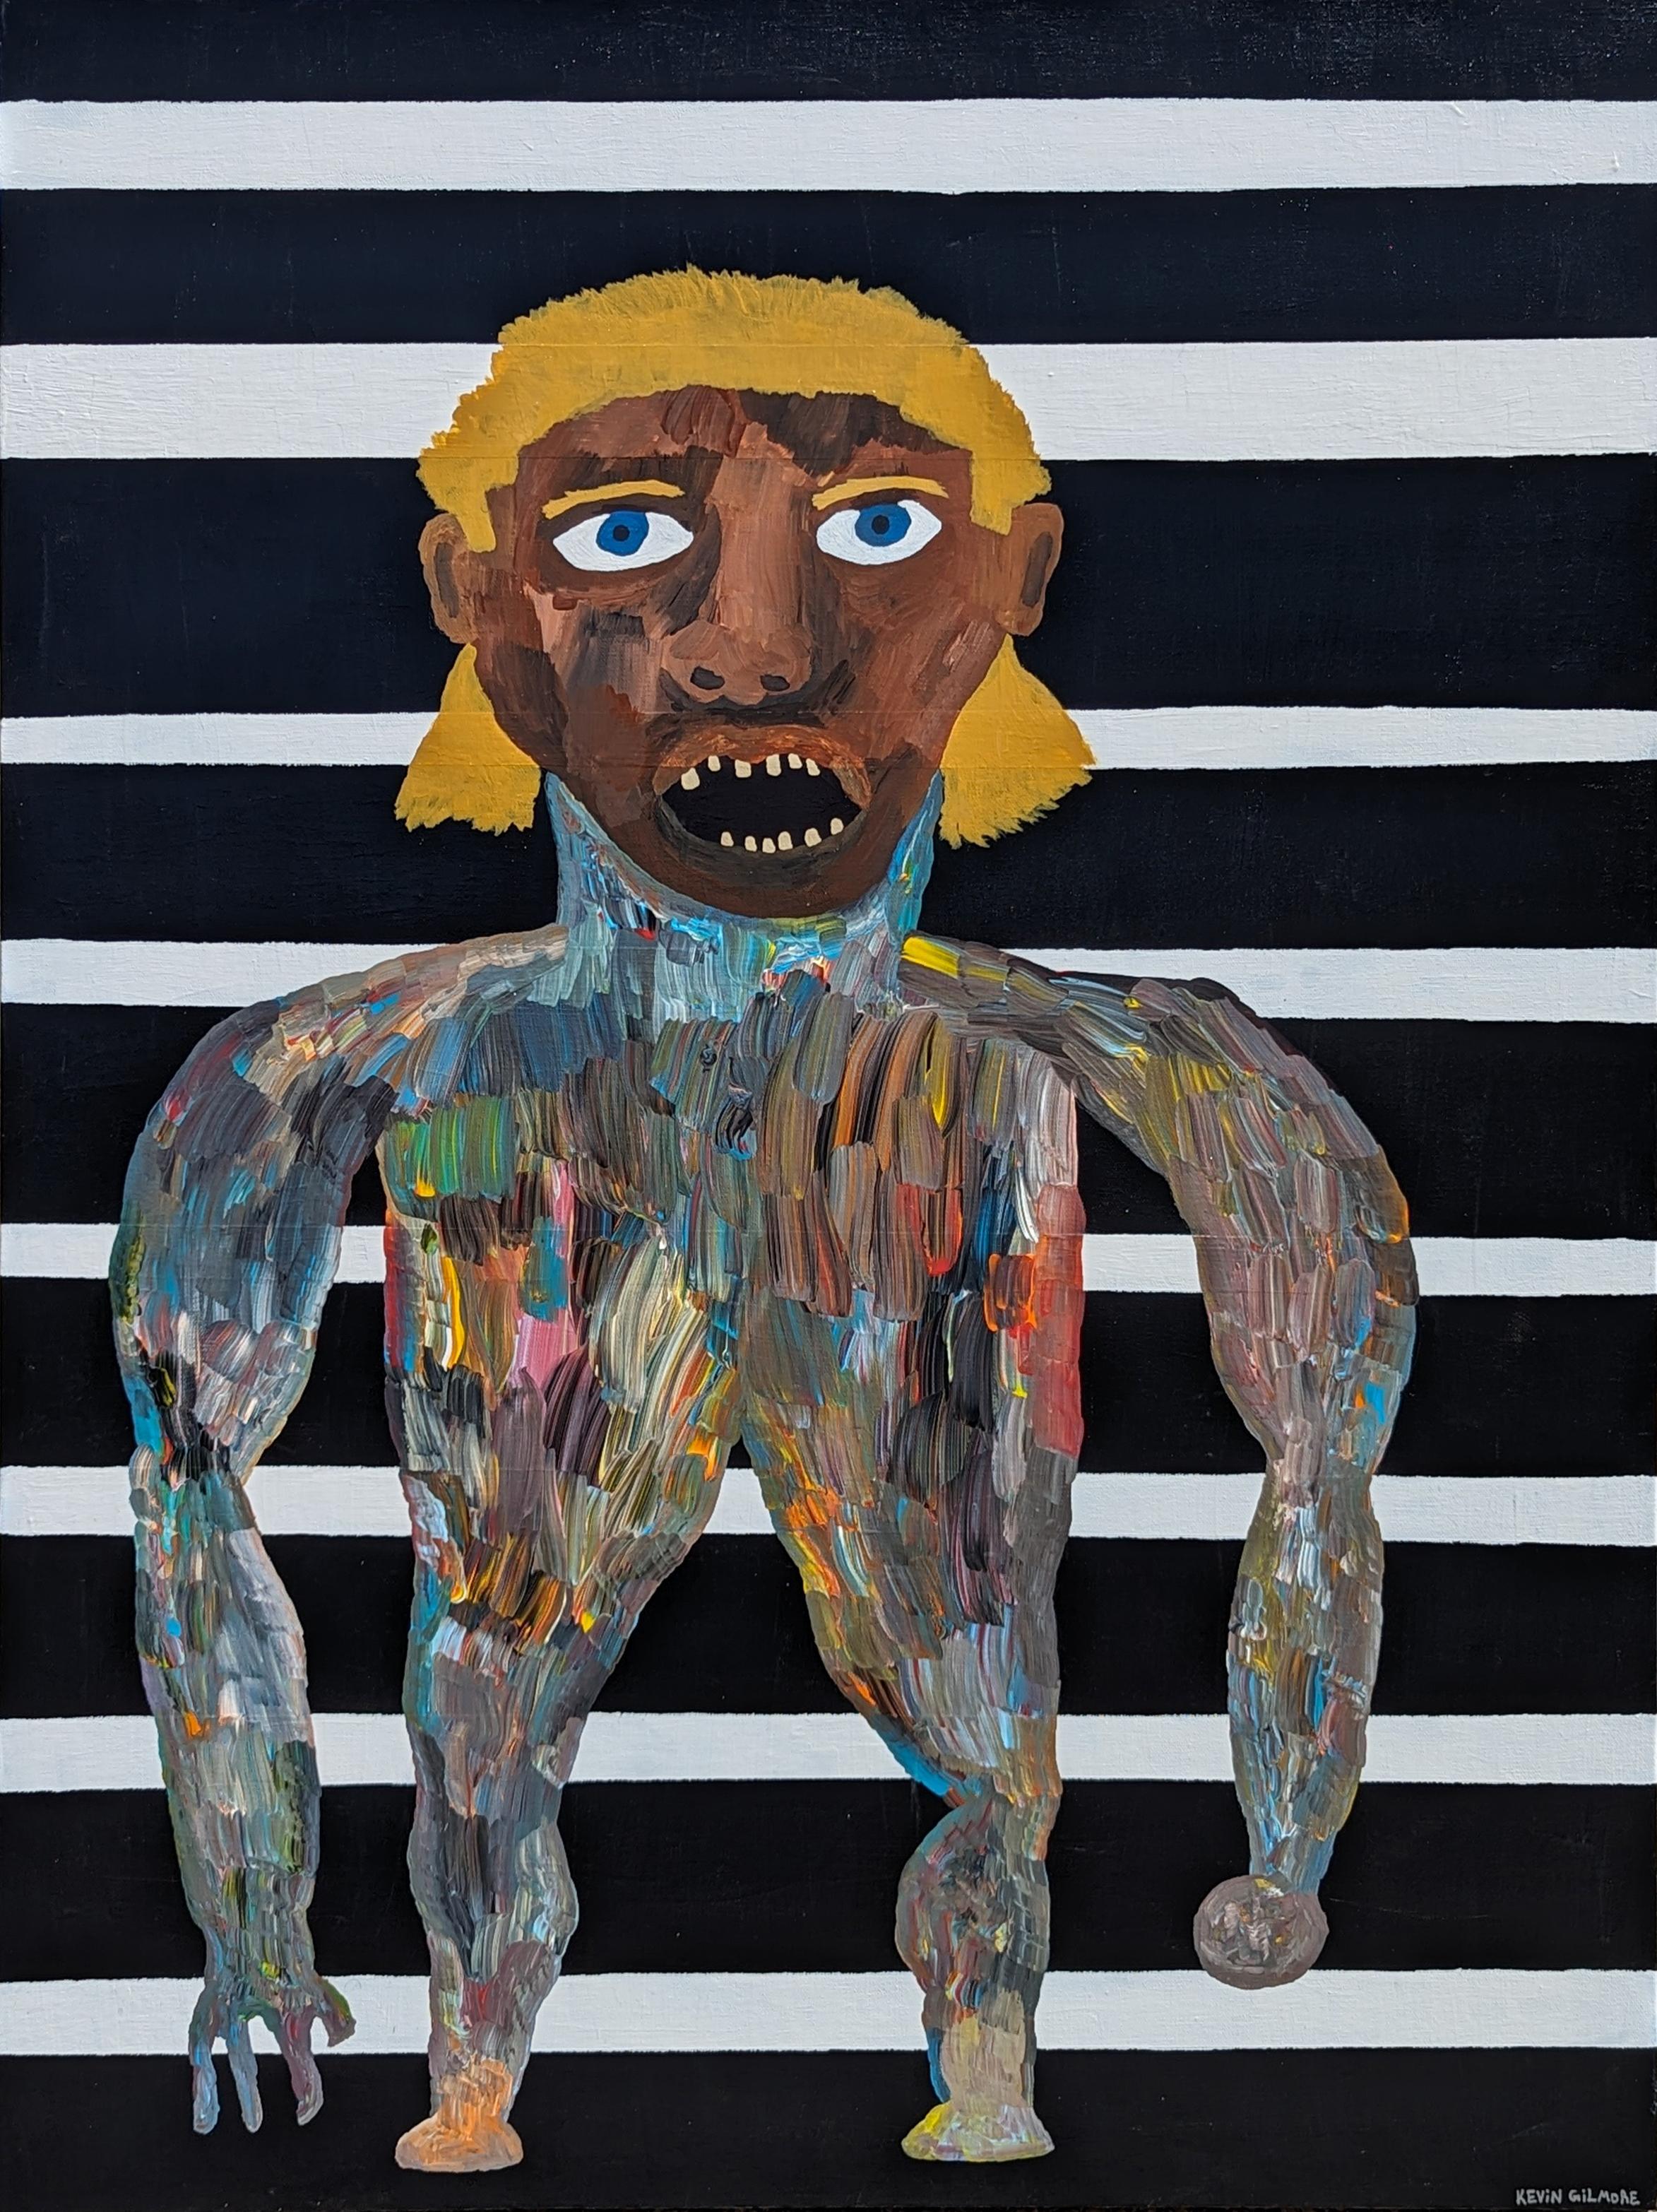 Kevin Gilmore Figurative Painting – "Mullet Man" Contemporary Striped Outsider Art Figurative Portrait Malerei